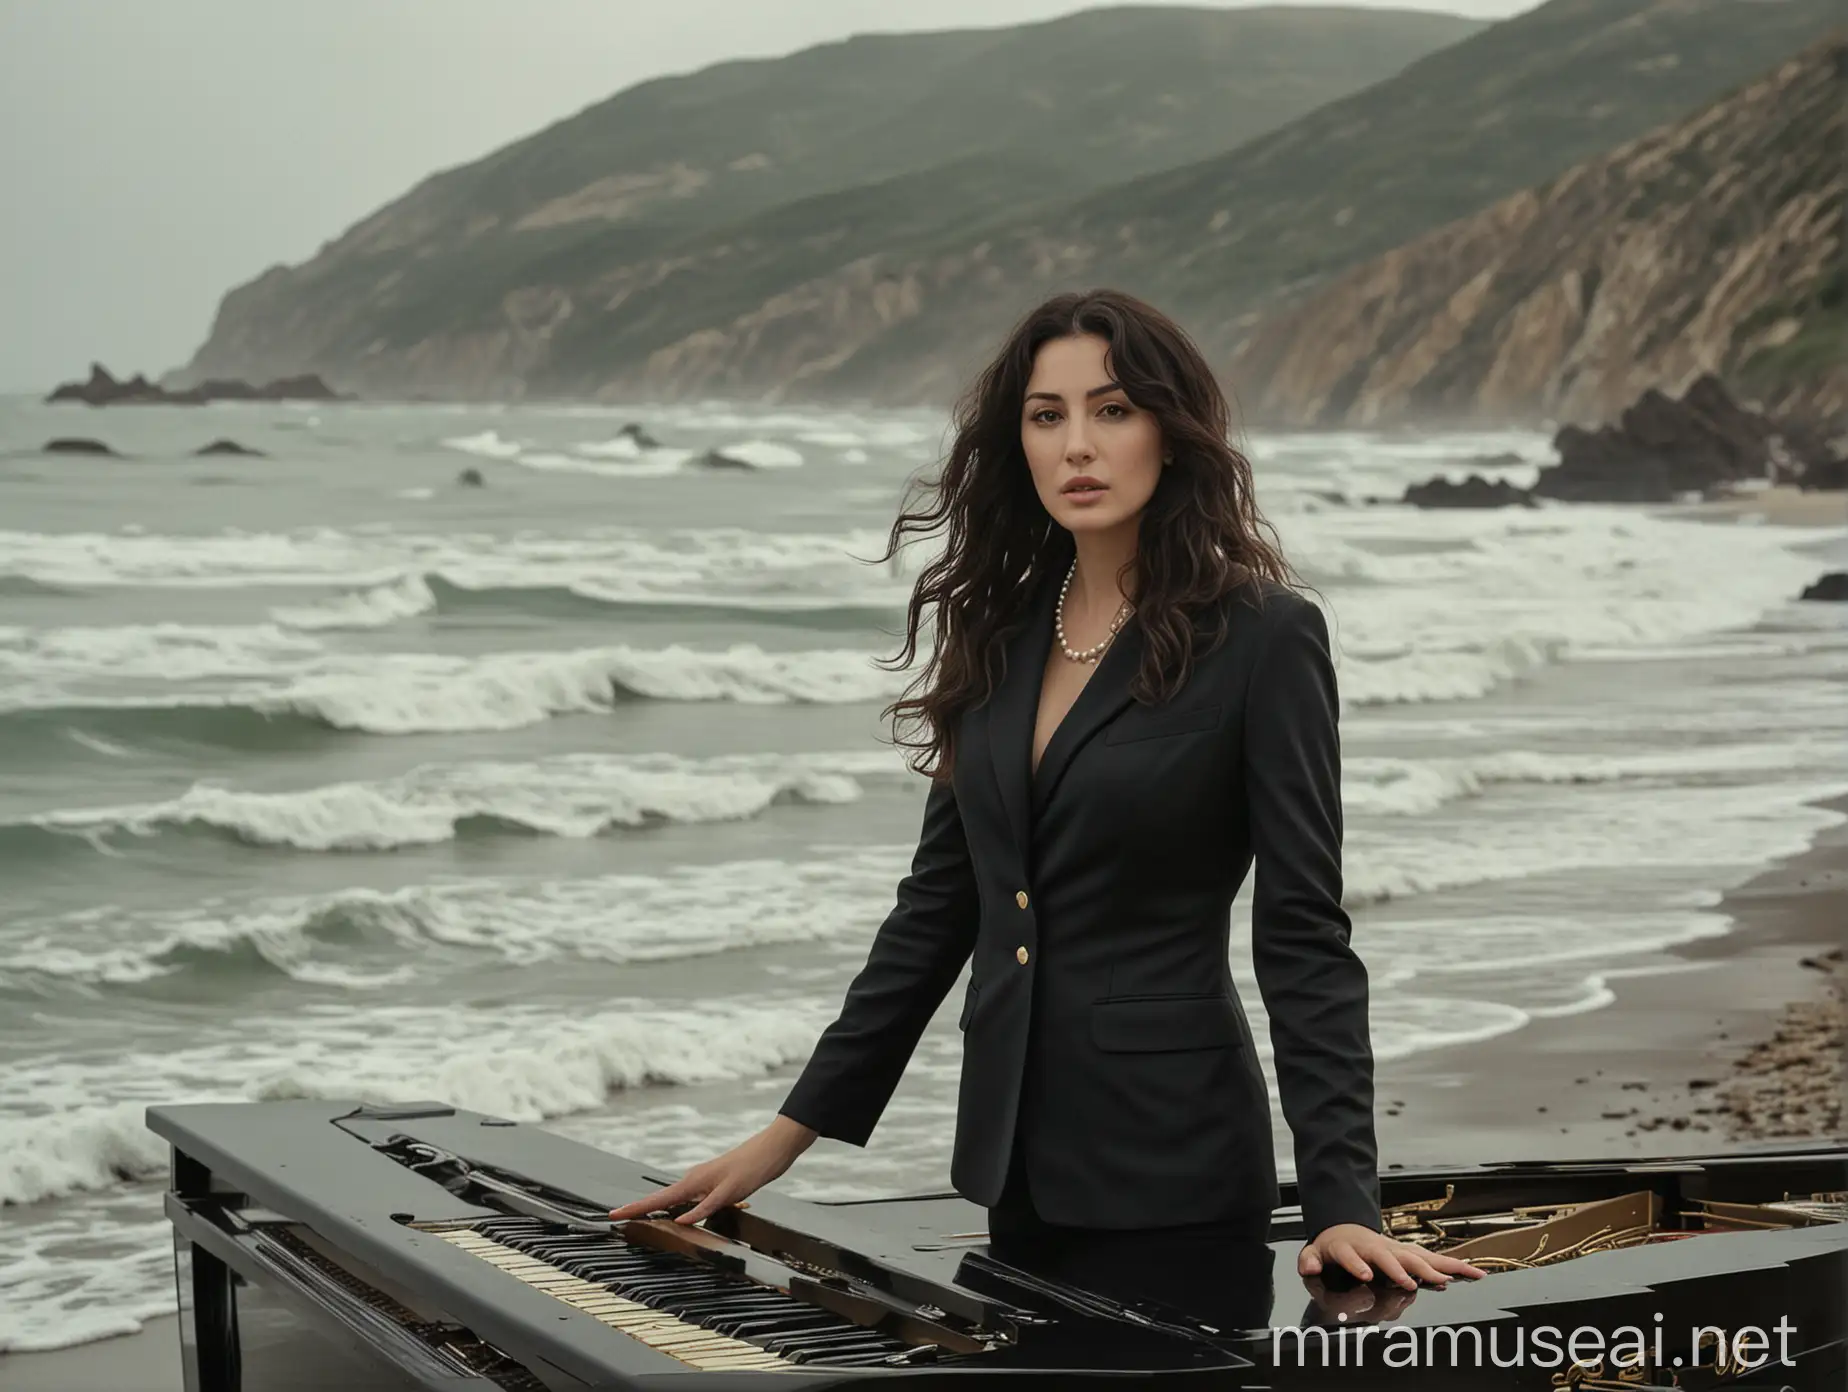 Melancholic Deva Cassel who is Monica Bellucci's daughter, with 60s makeup , wavy hair, wearing  pearl necklace and  black boxy blazer, stands near the big piano on the sea shore, I should sea the piano, the weather is cloudy, there are waves in the sea, hills far away, full shot